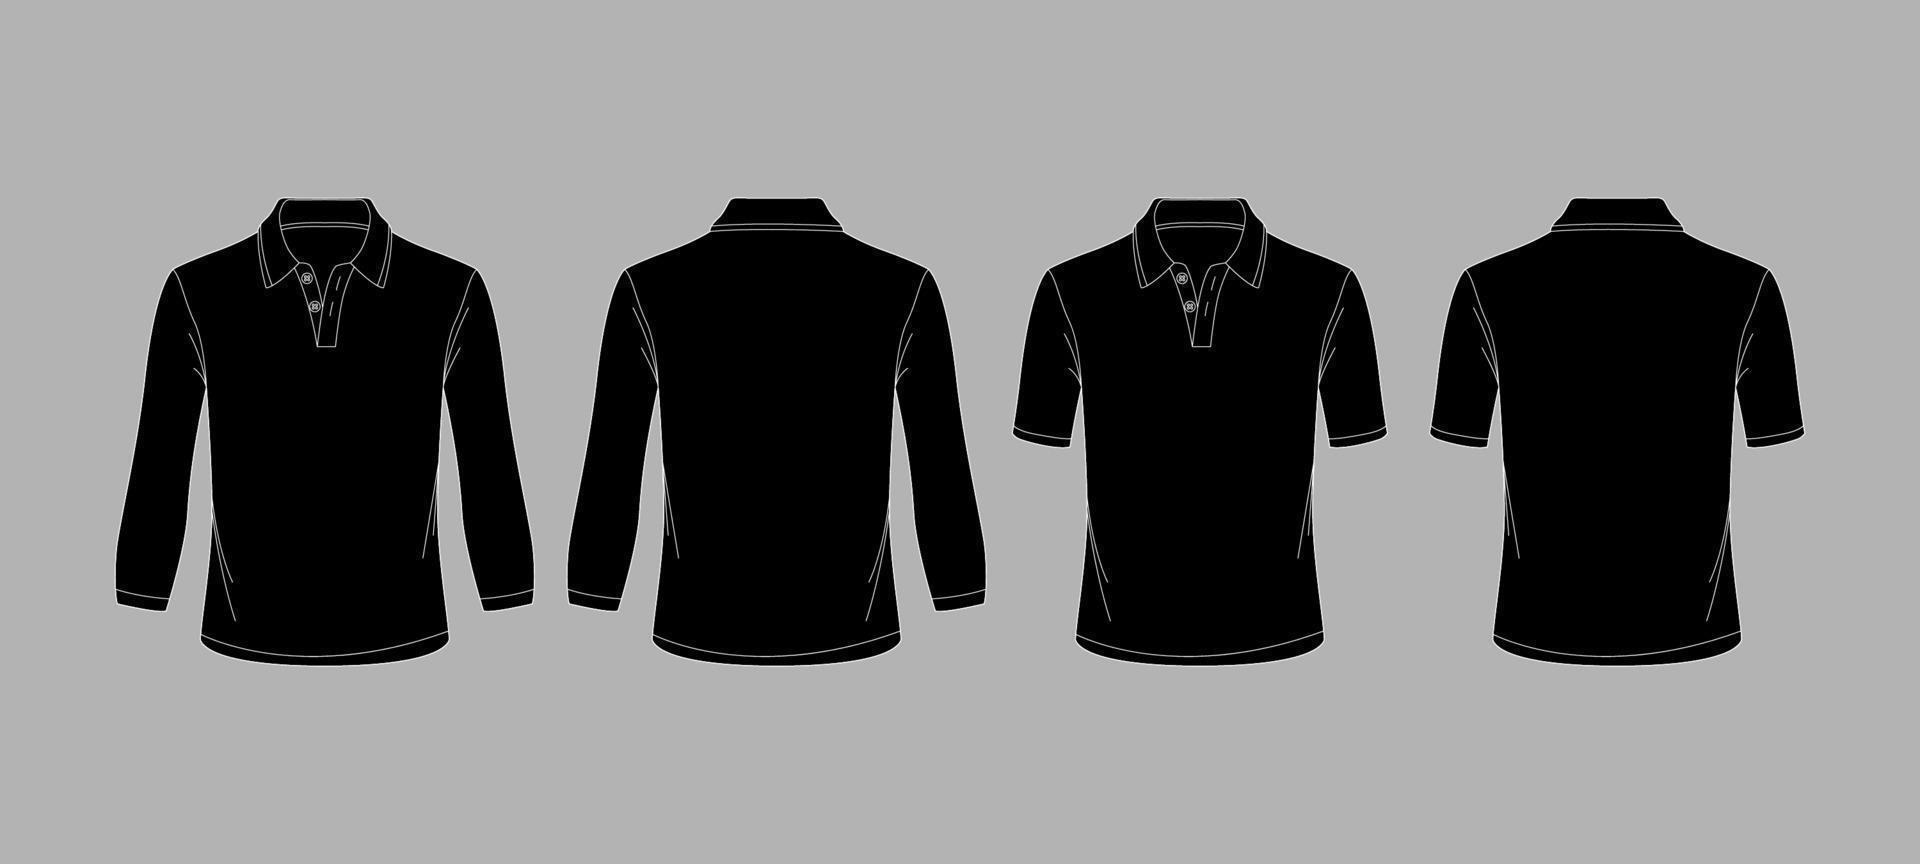 Black Outline Polo Mock Up Template vector